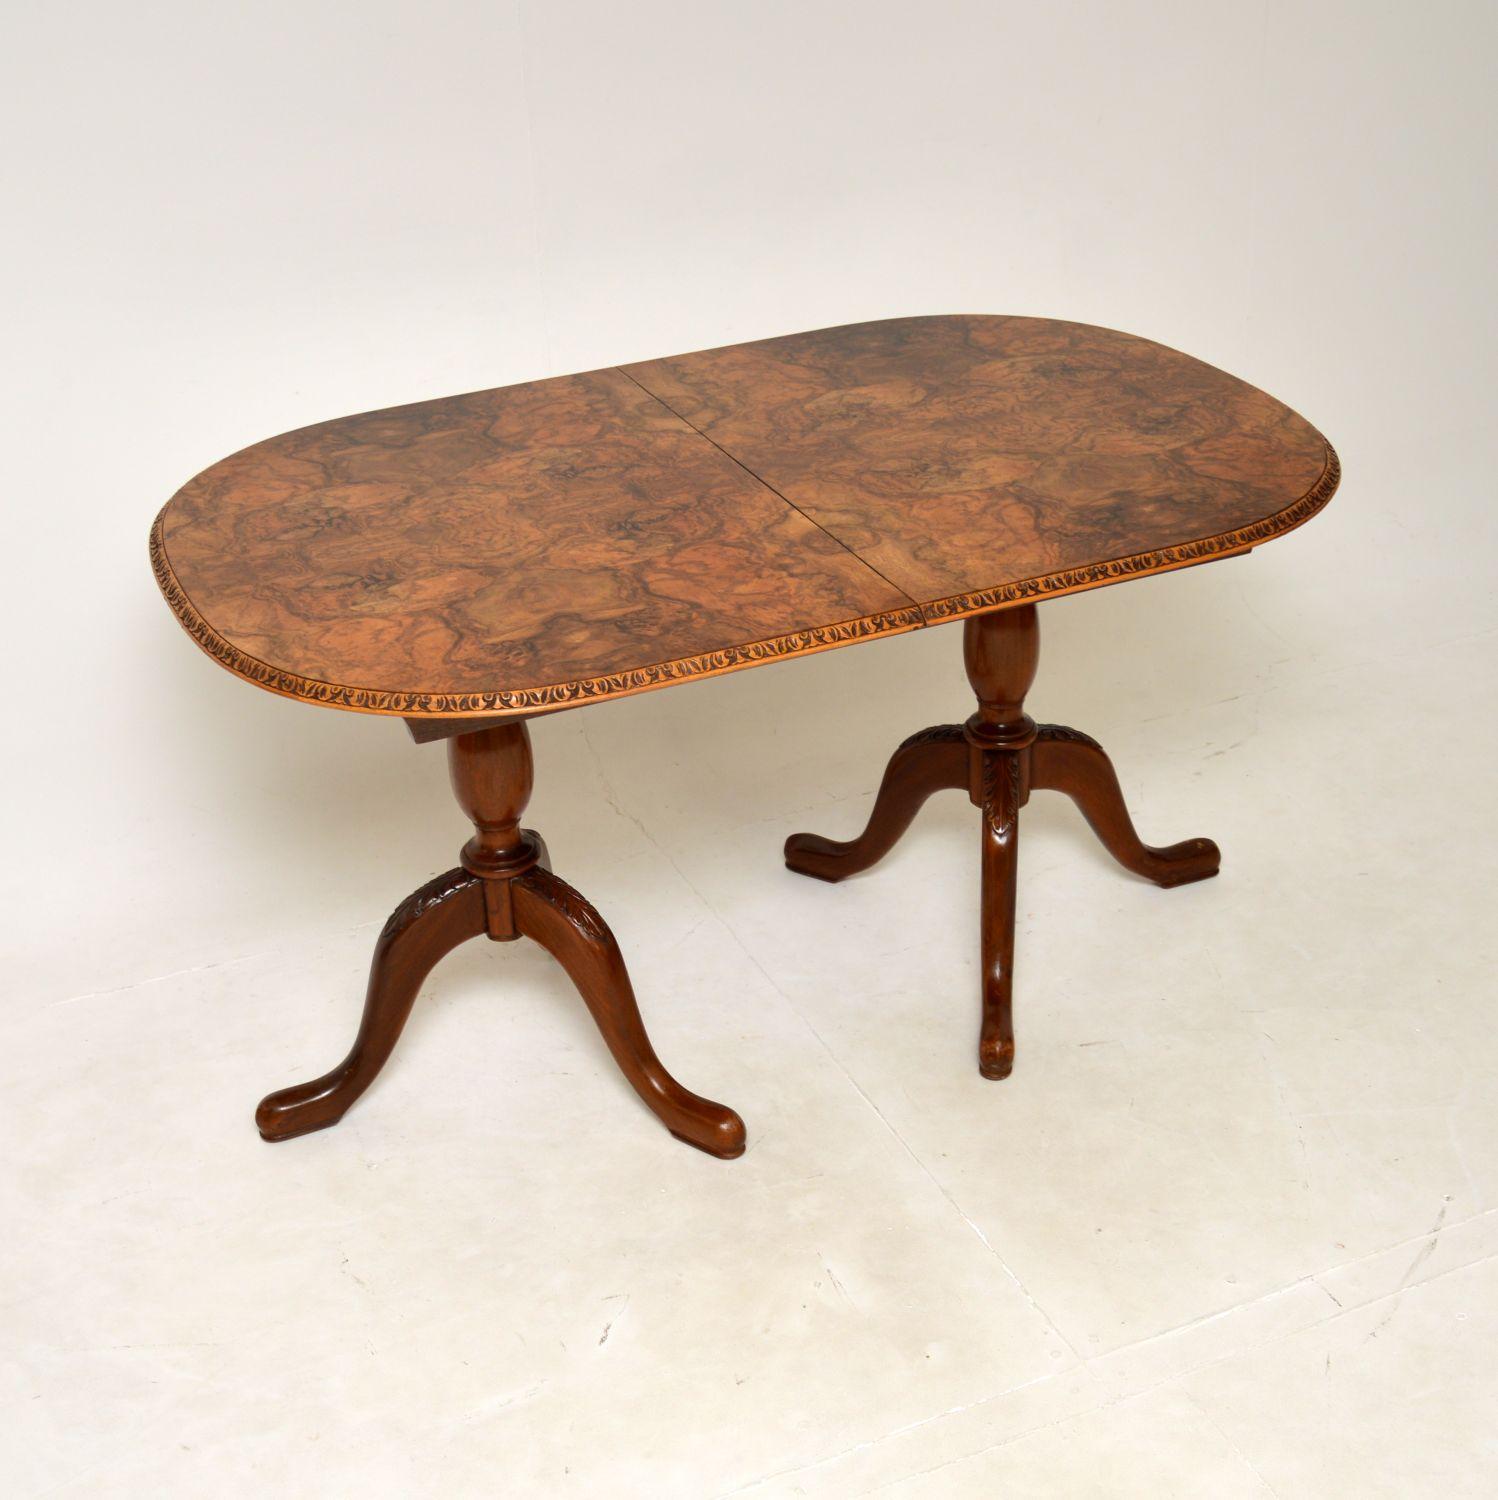 A gorgeous antique burr walnut extending dining table. This was made in England, it dates from around the 1920-30’s.

It is of superb quality, the top has beautifully carved edges and absolutely stunning burr walnut grain patterns. This sits on a